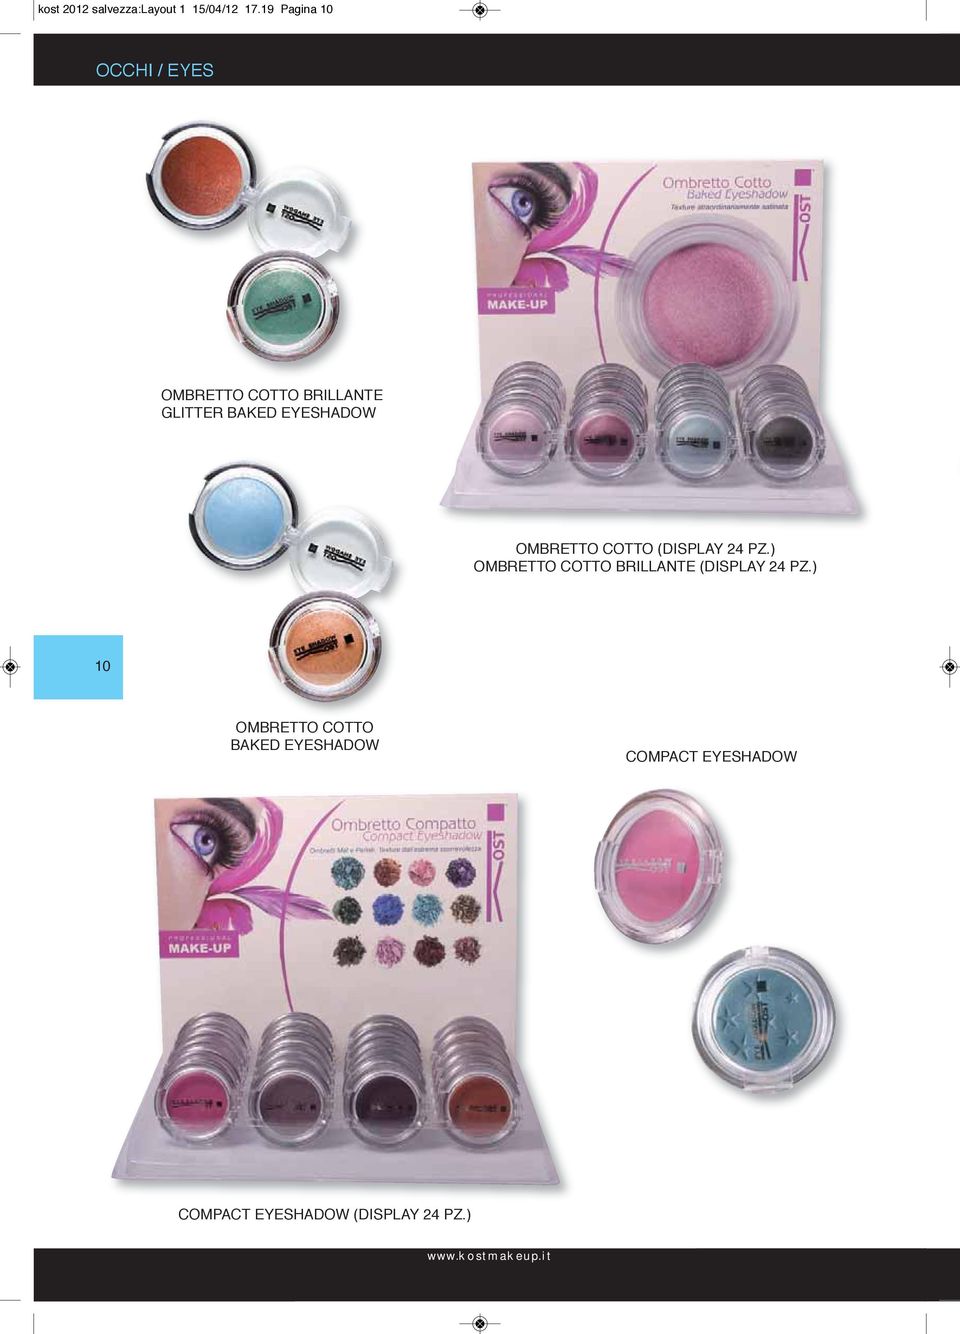 EYESHADOW OMBRETTO COTTO (DISPLAY 24 PZ.